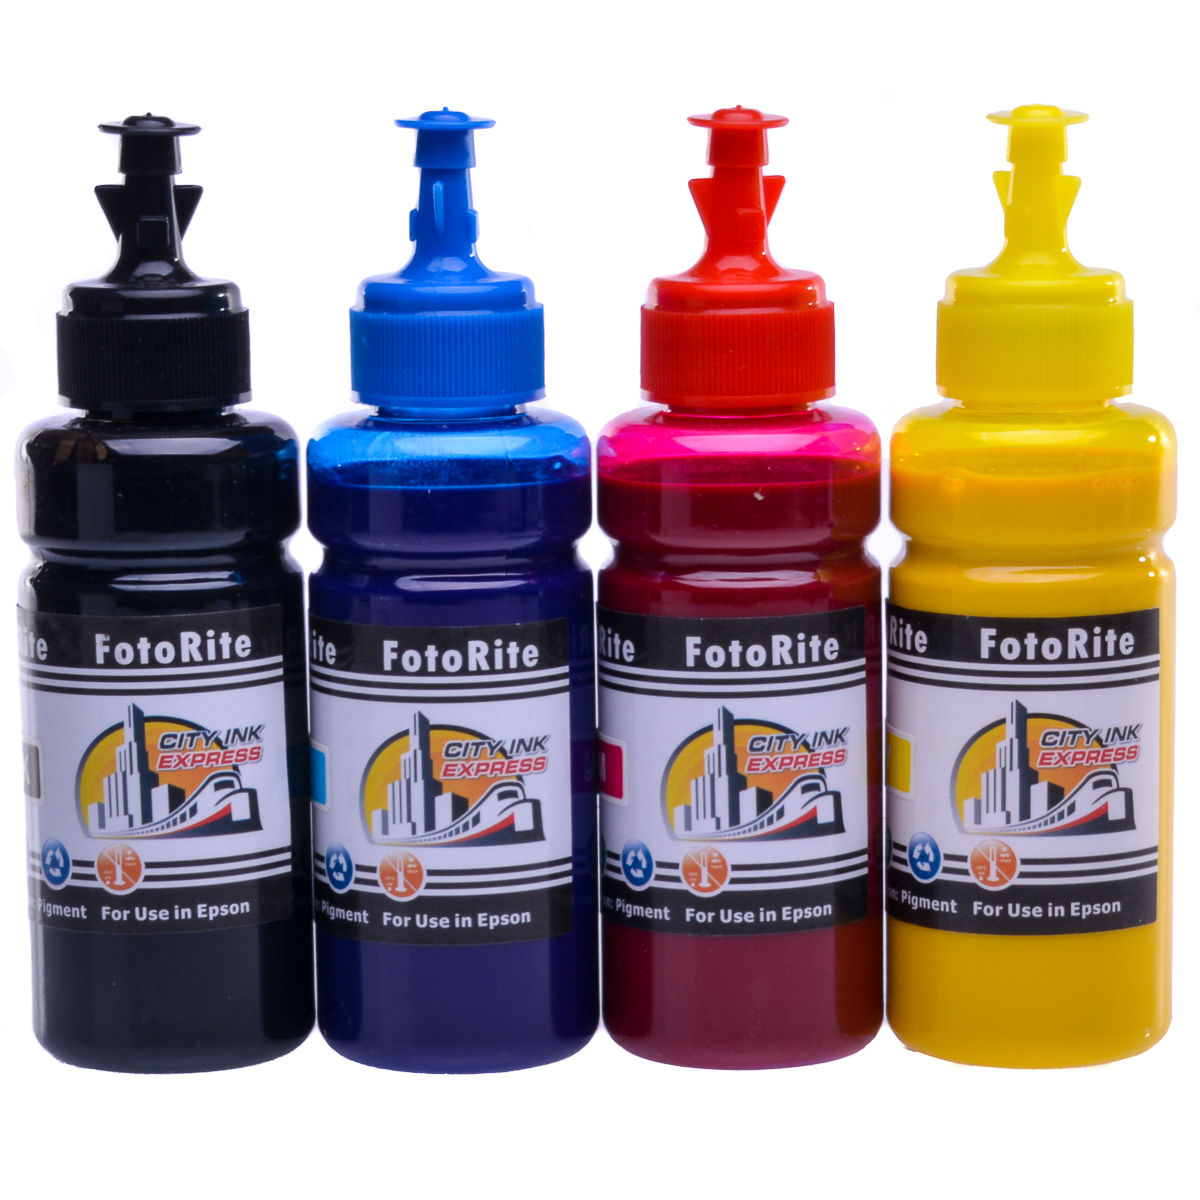 Cheap Multipack pigment ink refill replaces Epson ET-16150